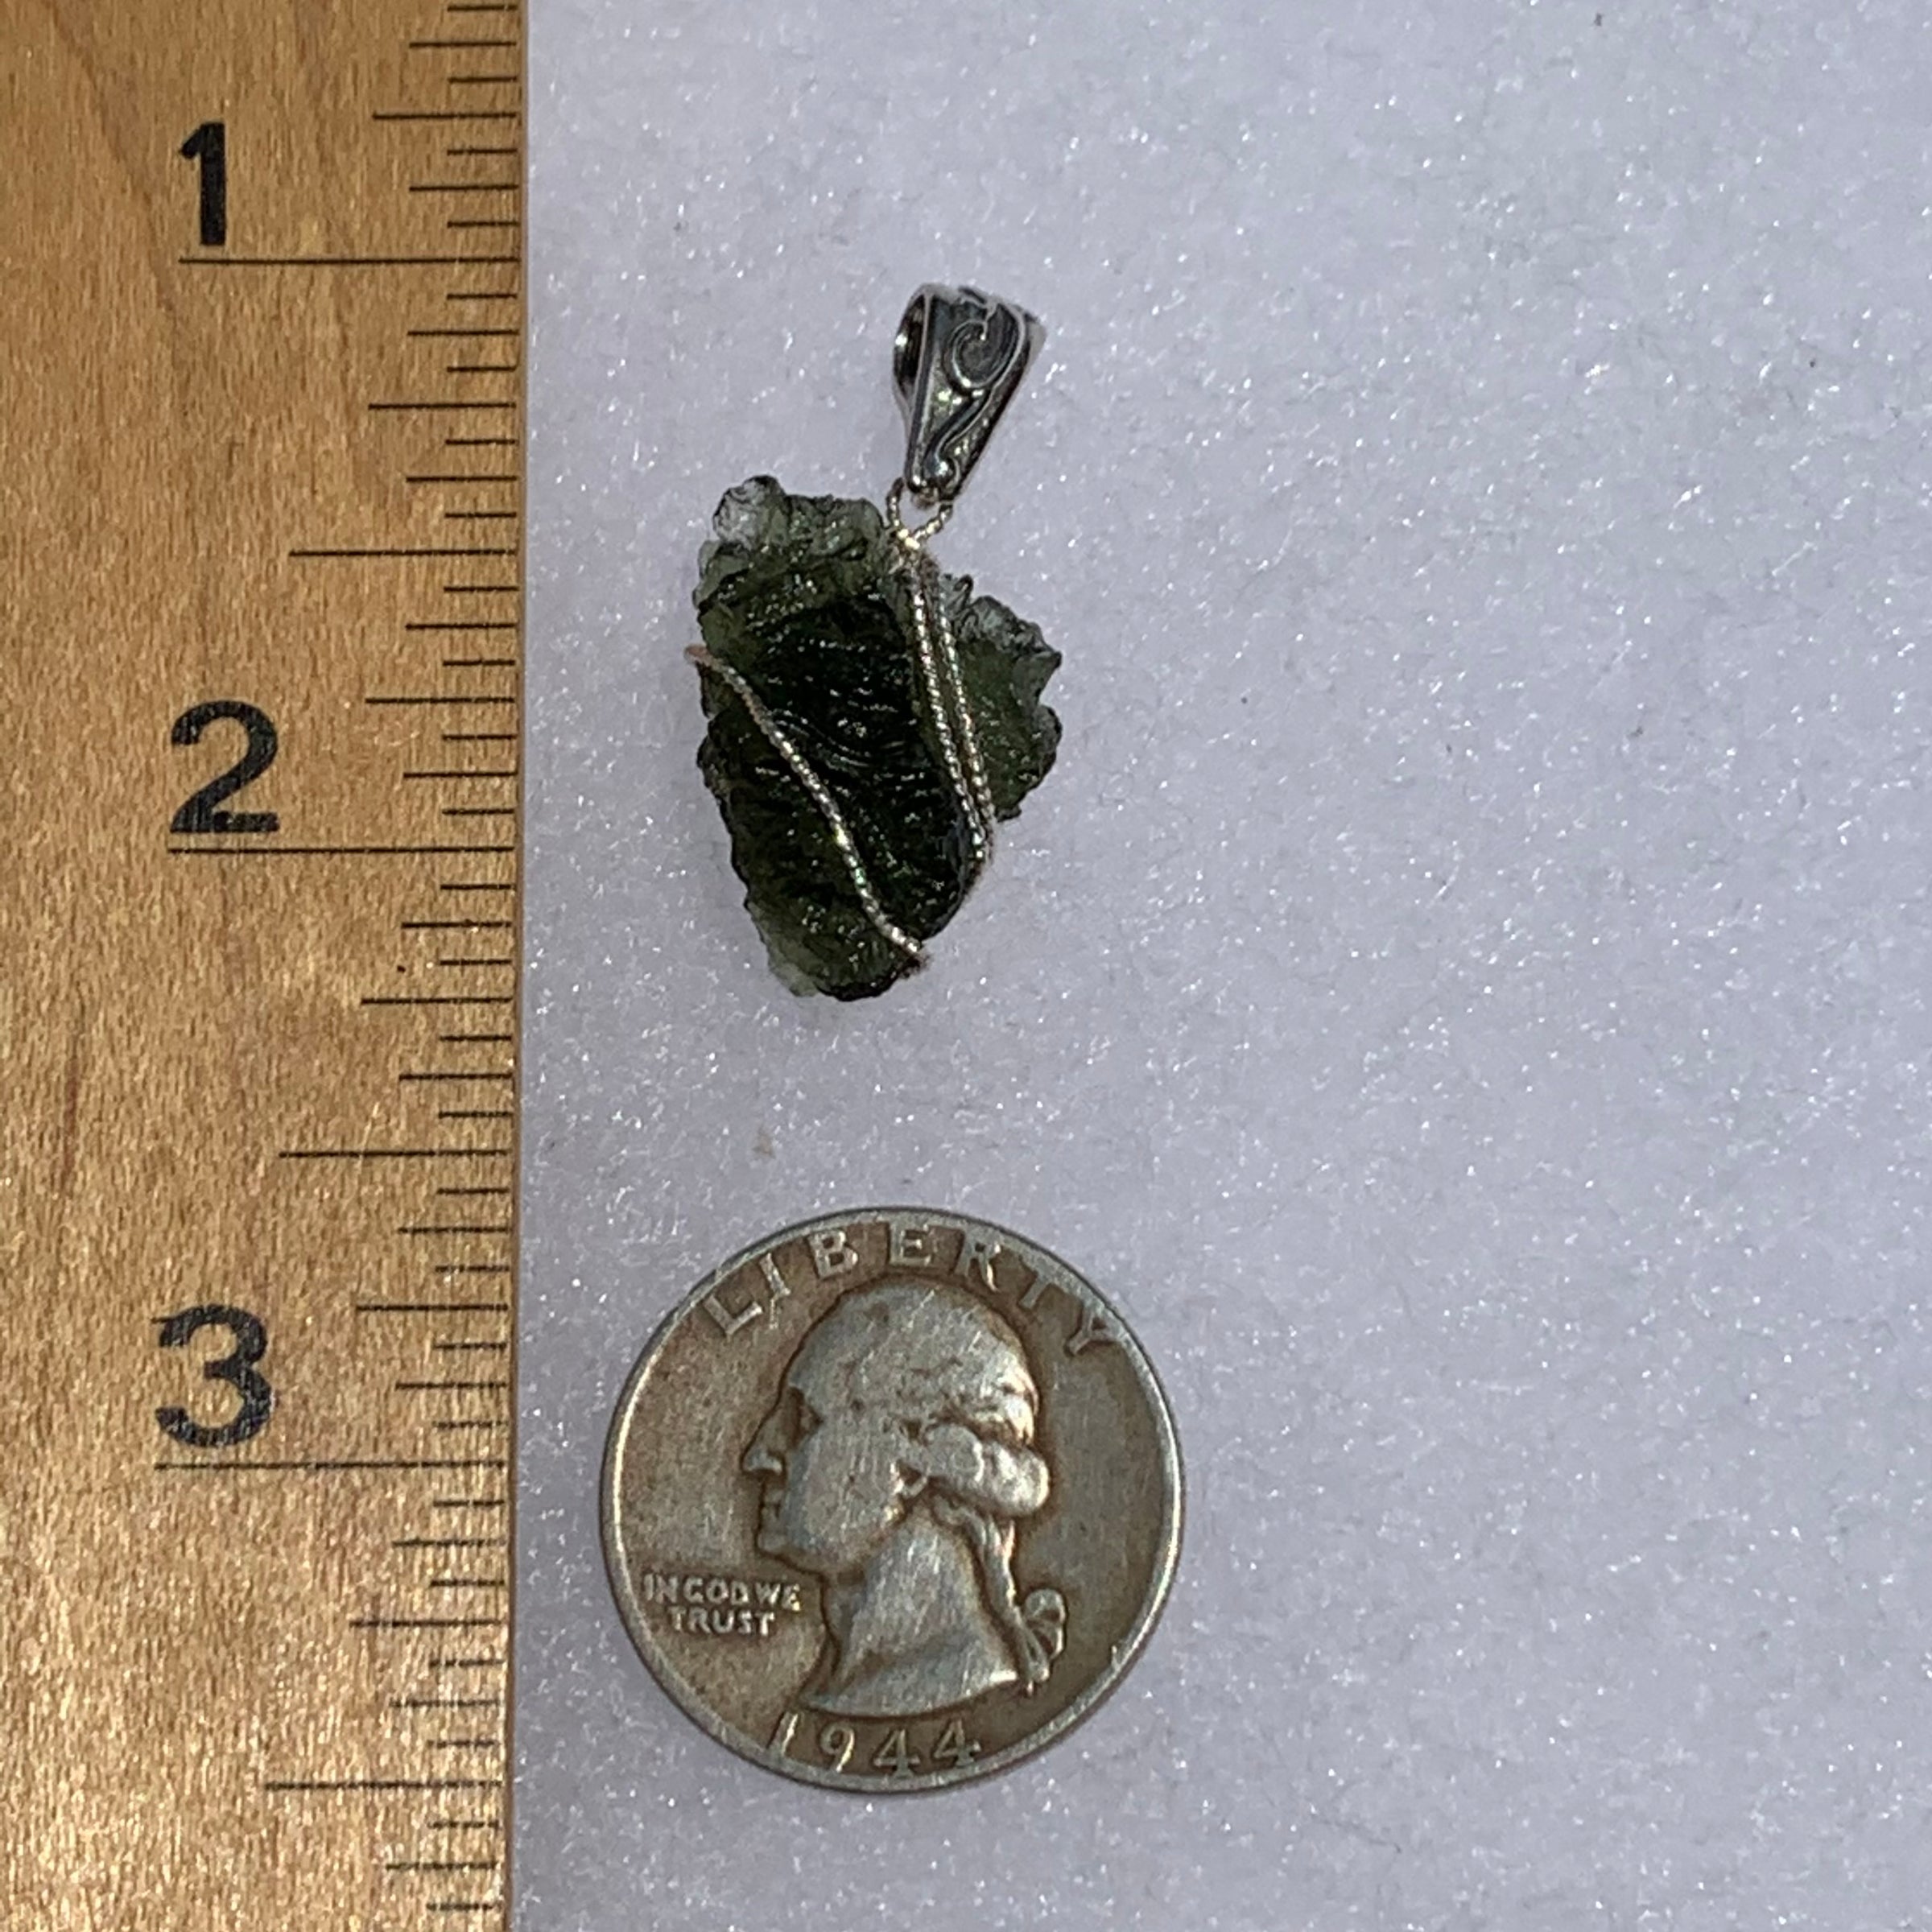 Wire wrapped moldavite pendant next to a ruler and US quarter to show scale